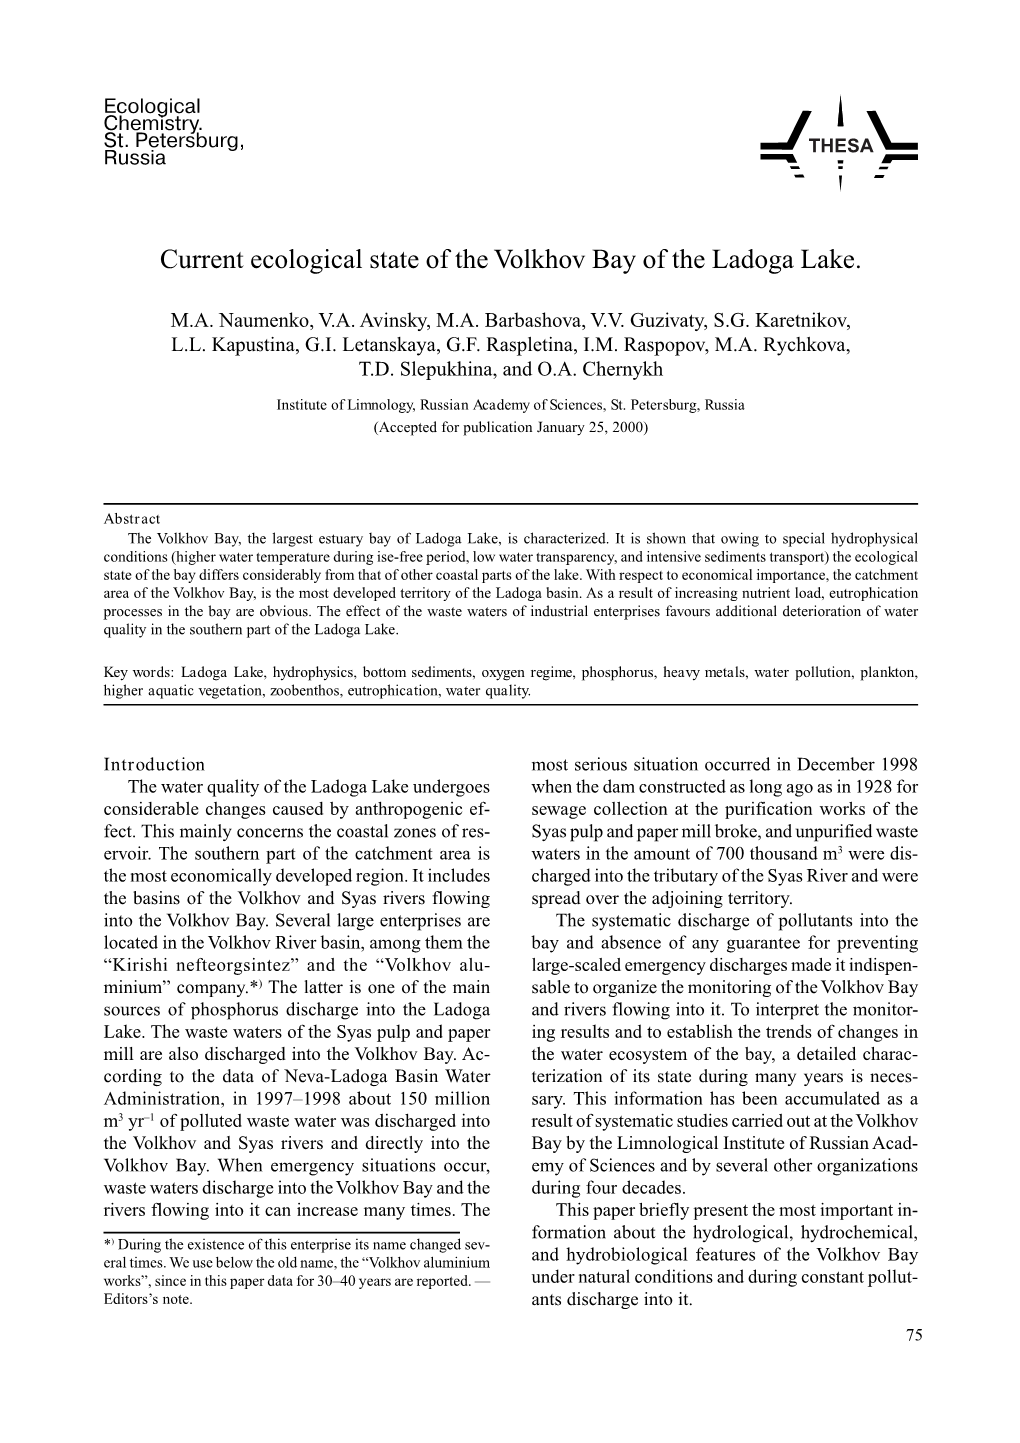 Current Ecological State of the Volkhov Bay of the Ladoga Lake